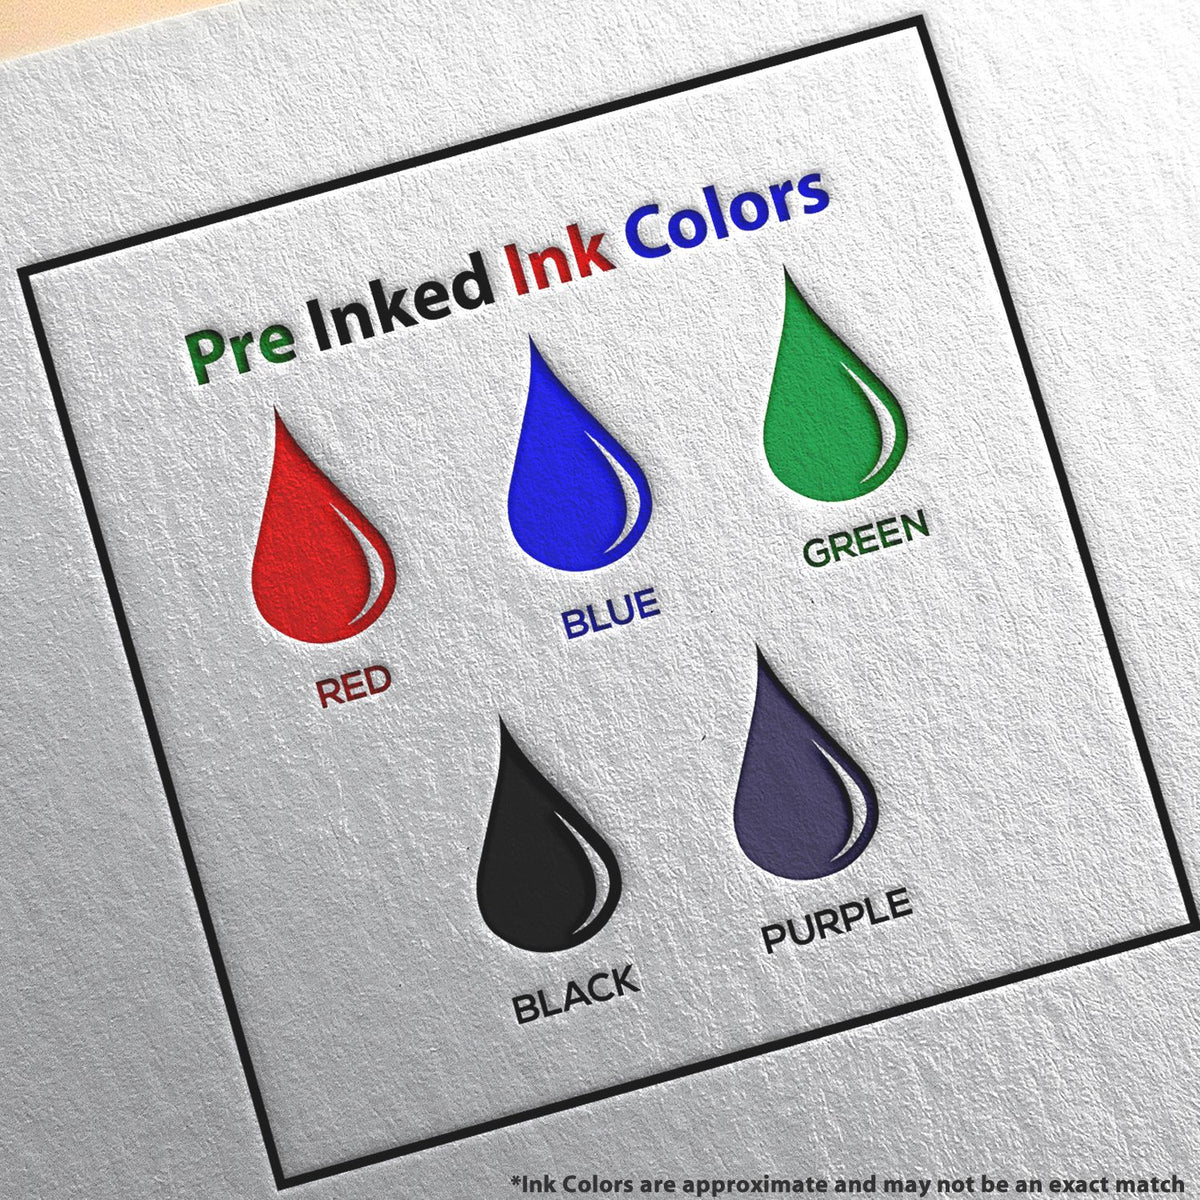 A picture showing the different ink colors or hues available for the Premium MaxLight Pre-Inked Wyoming Landscape Architectural Stamp product.